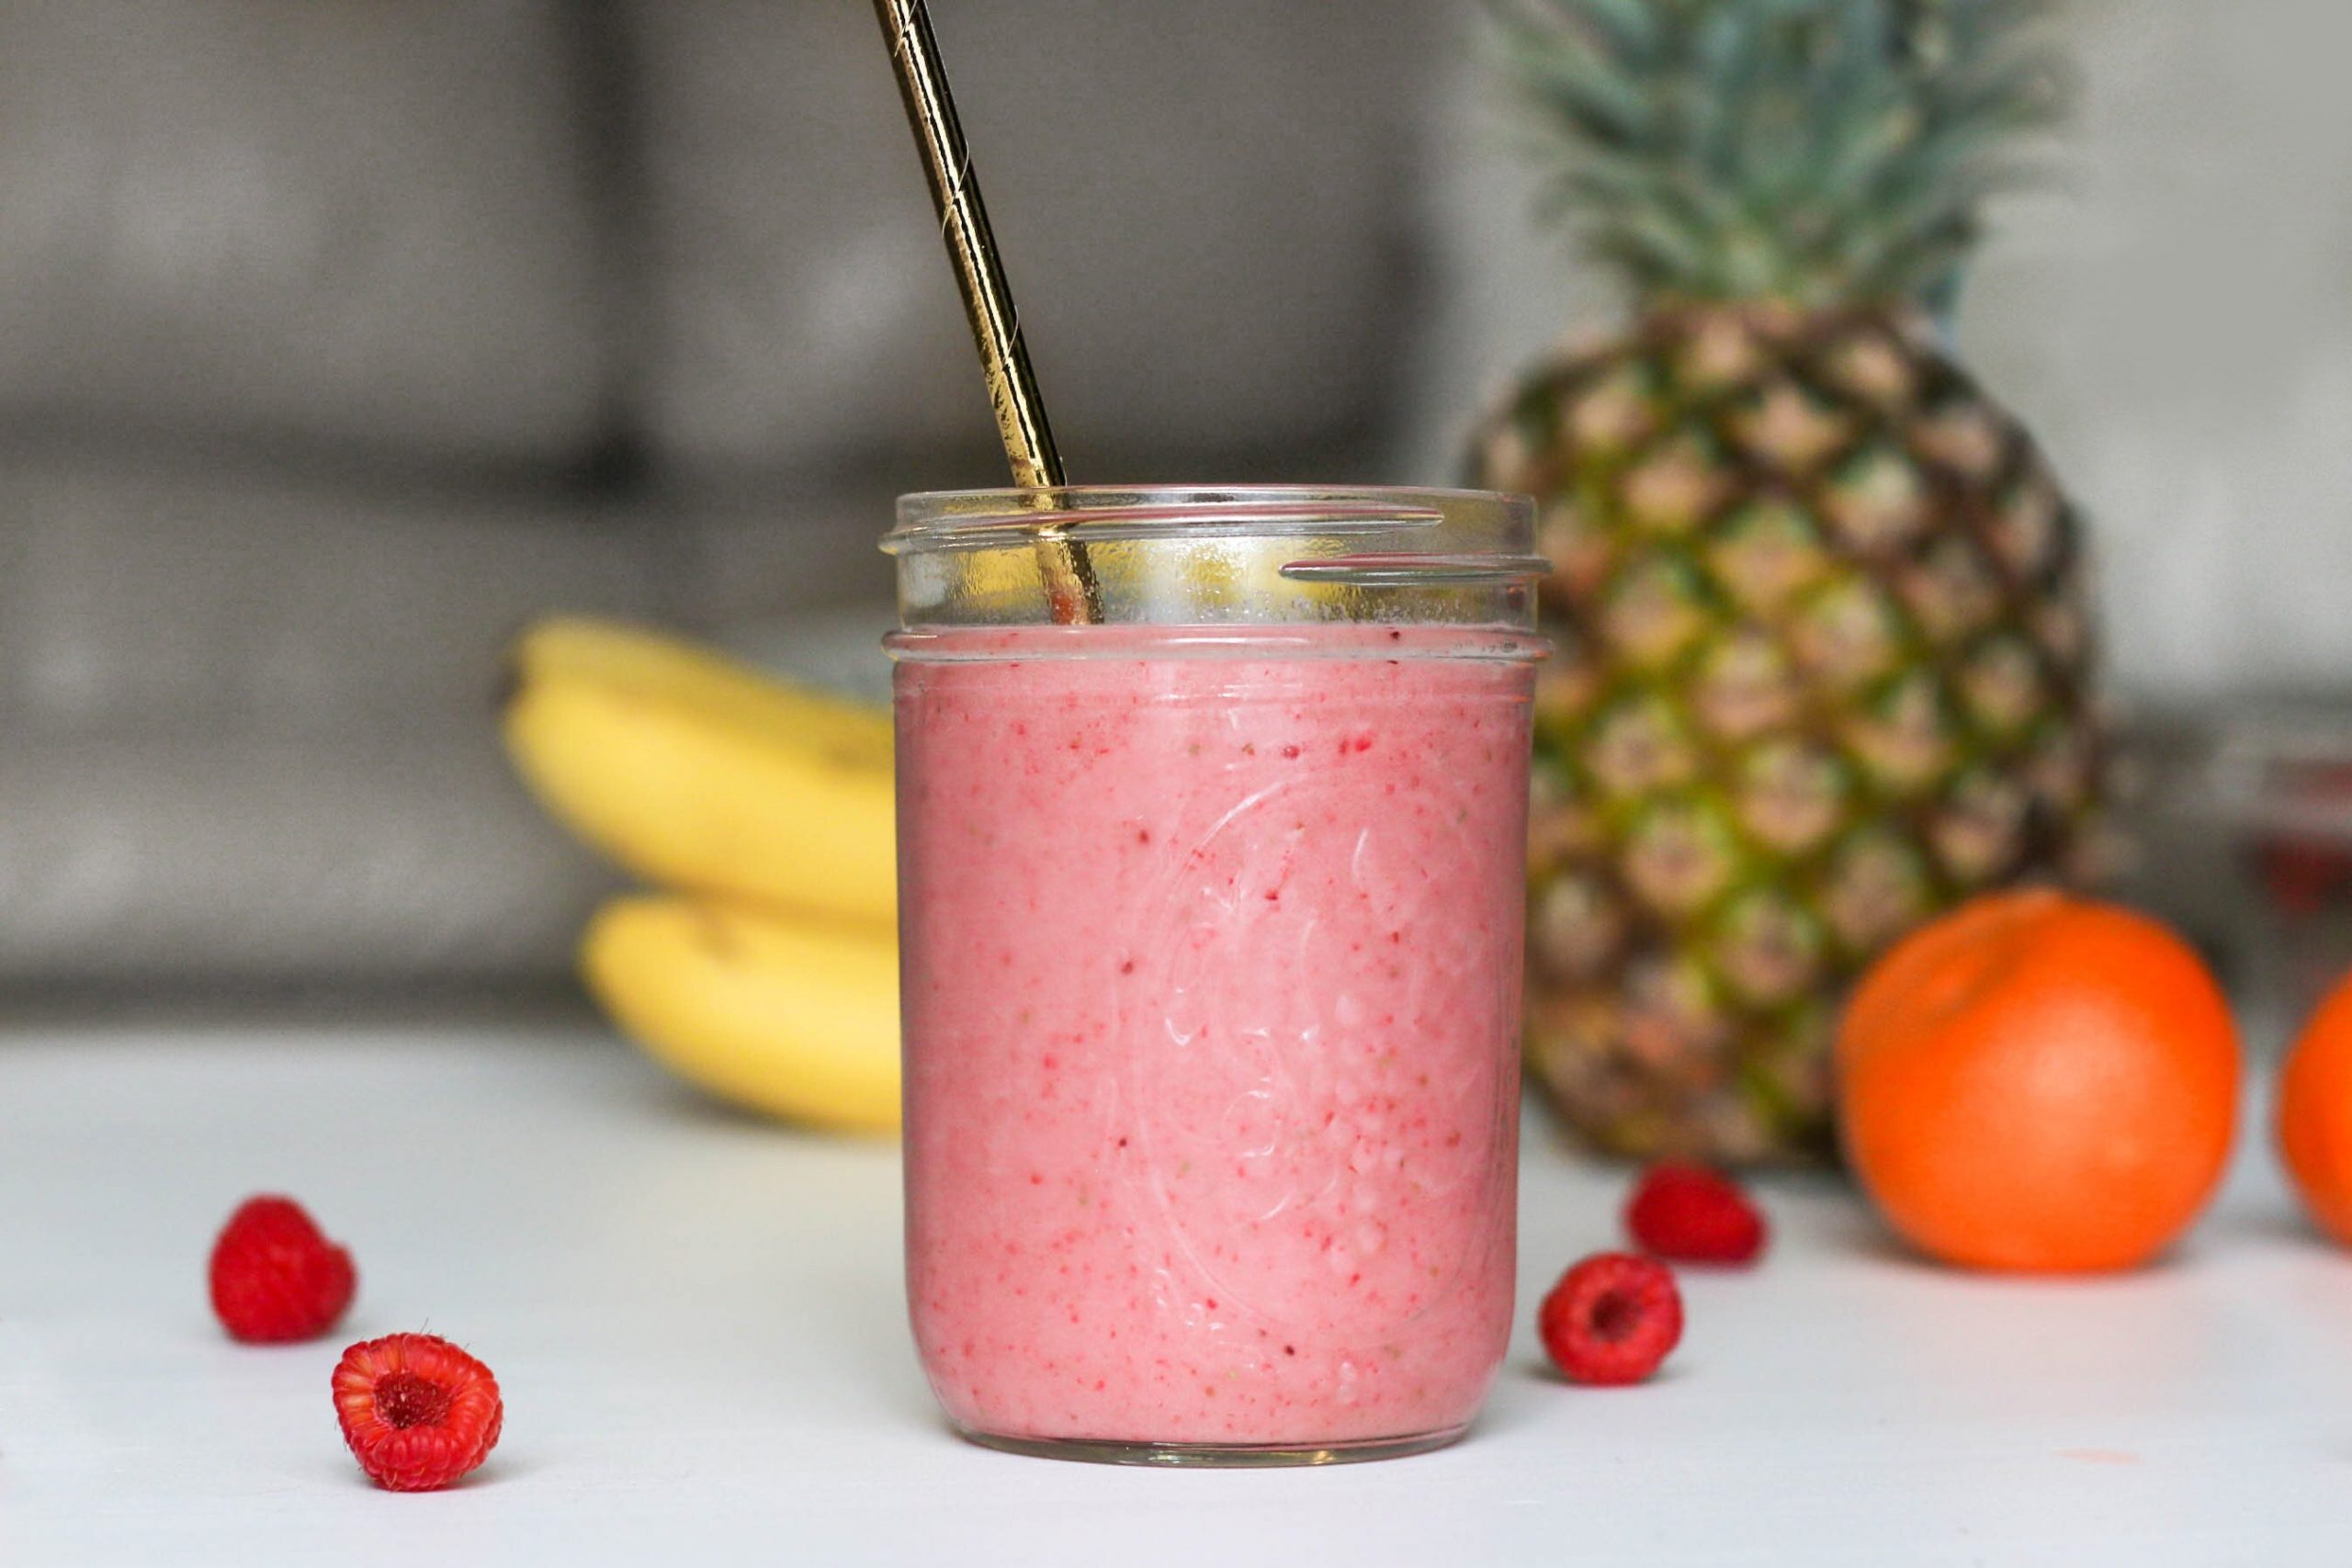 23 healthy smoothie recipes to kick-start your new year